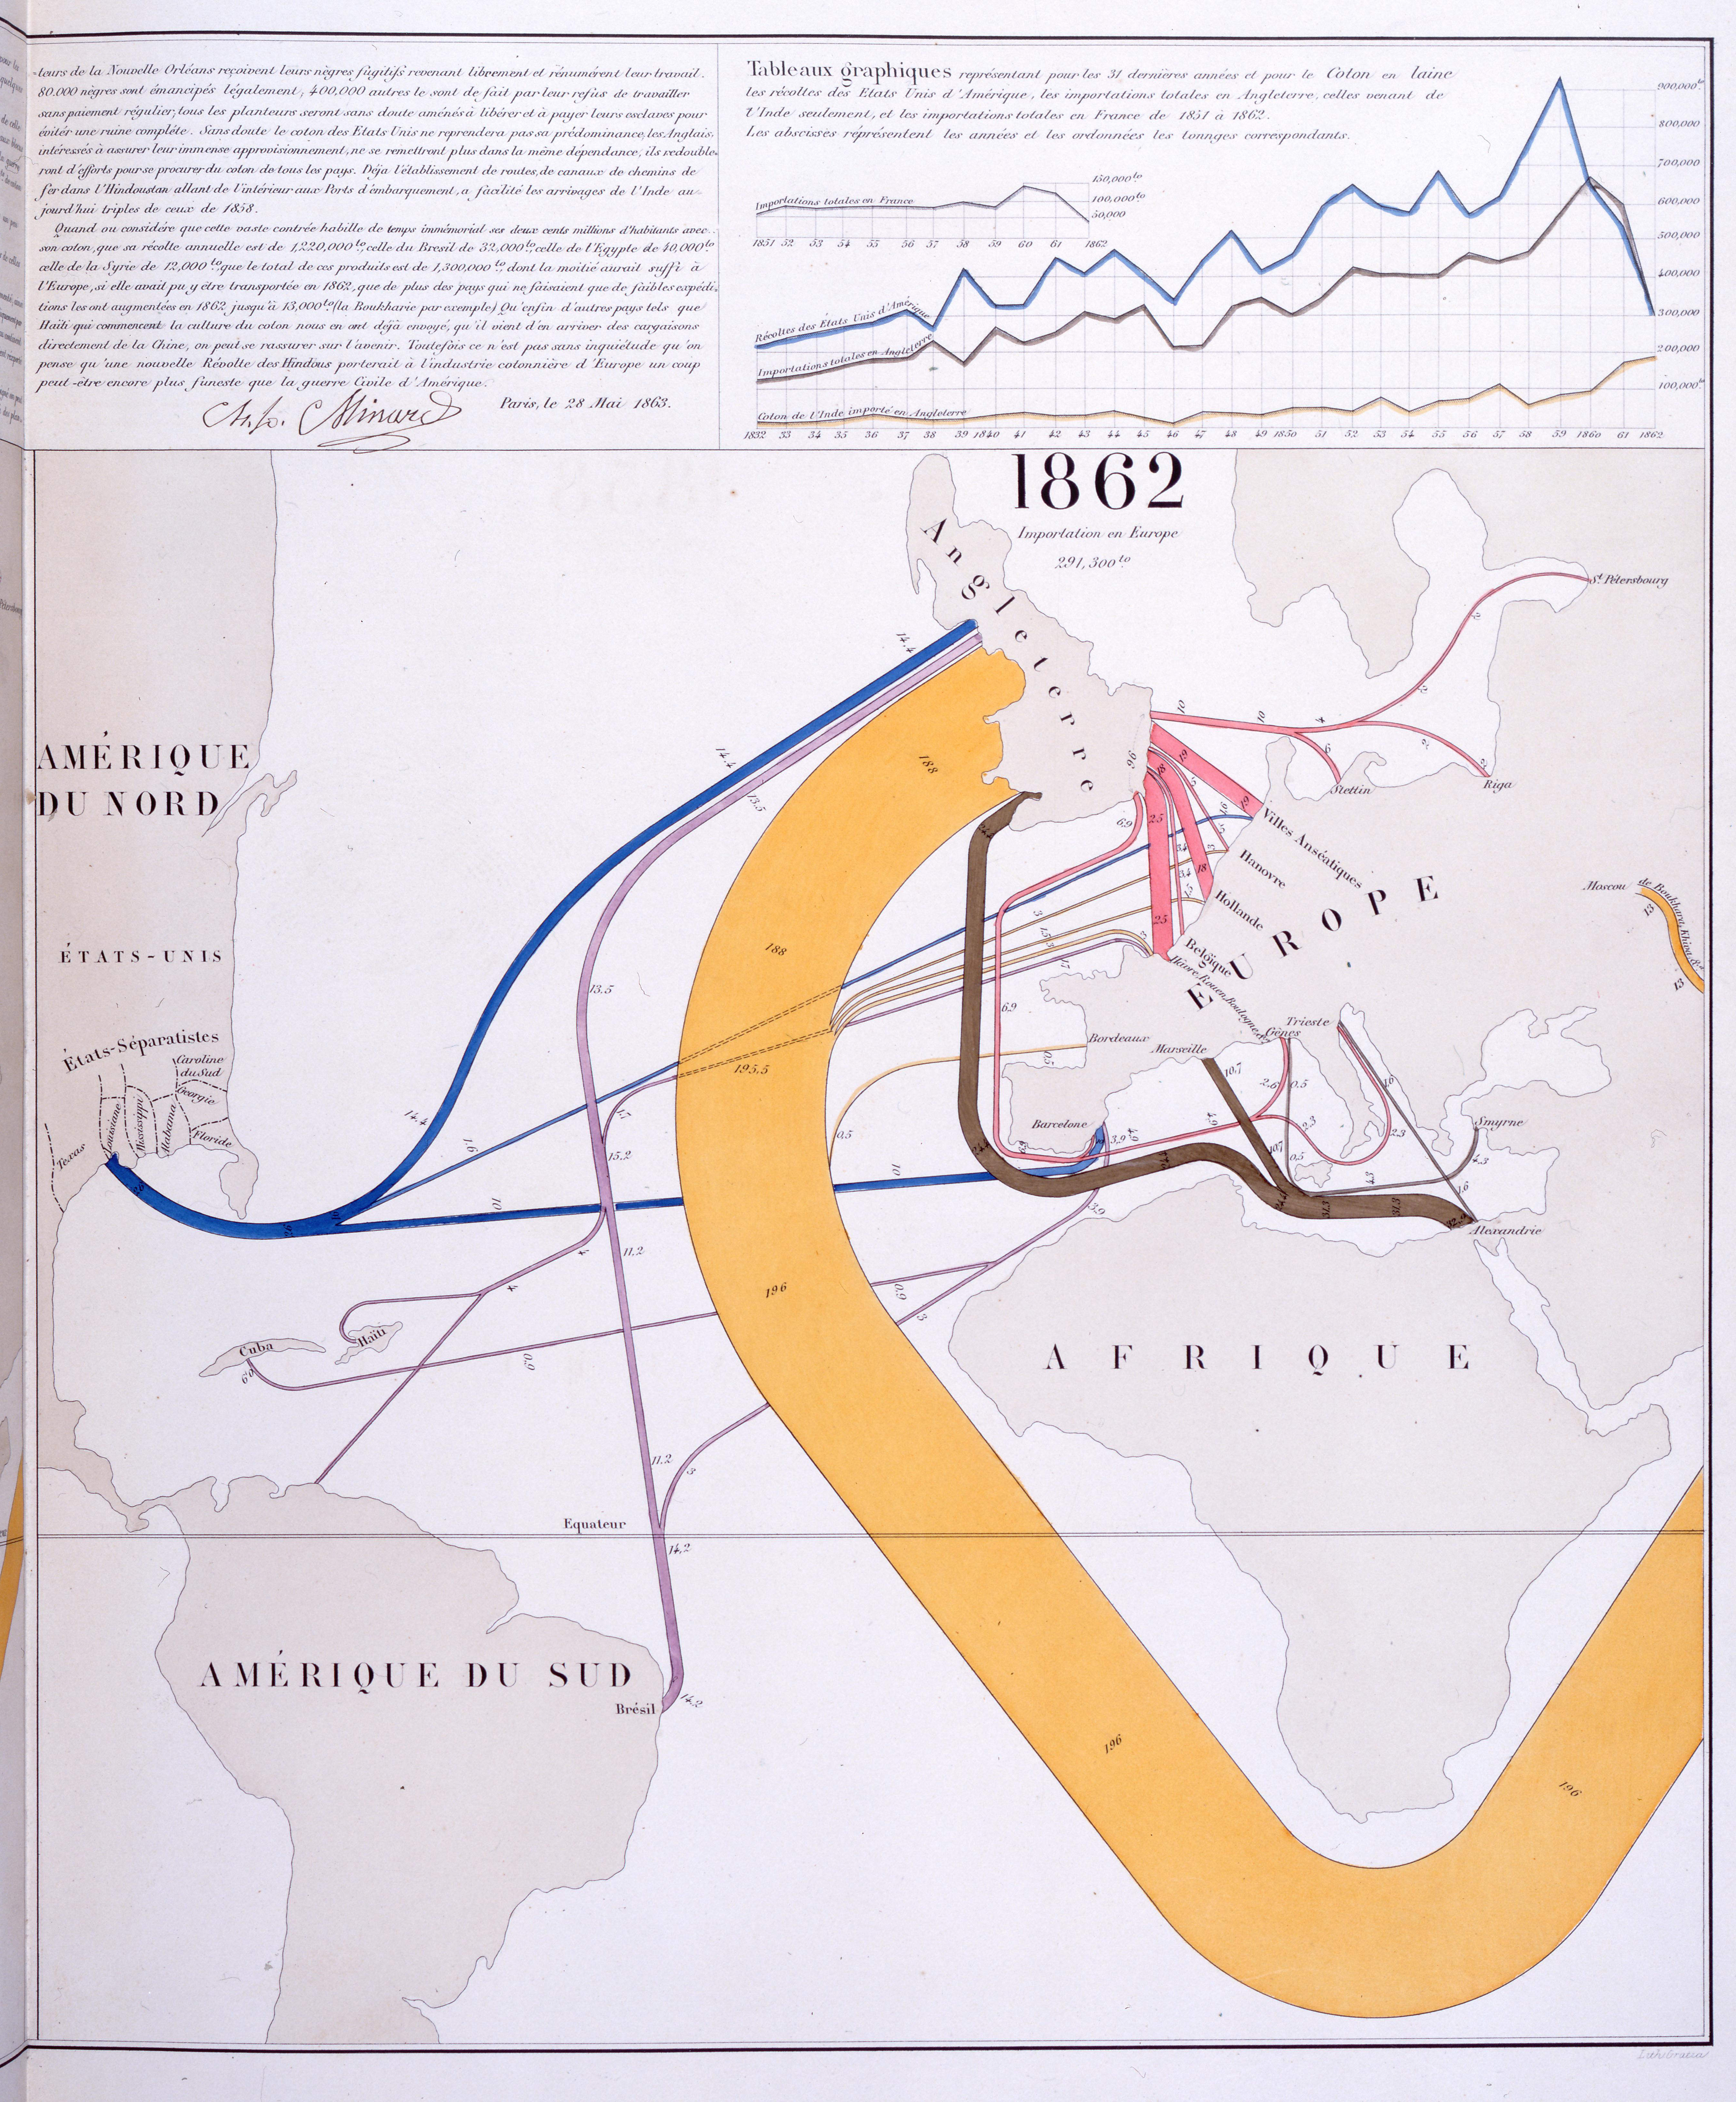 Comparative flow maps: Effect of the US Civil War on trade in cotton.